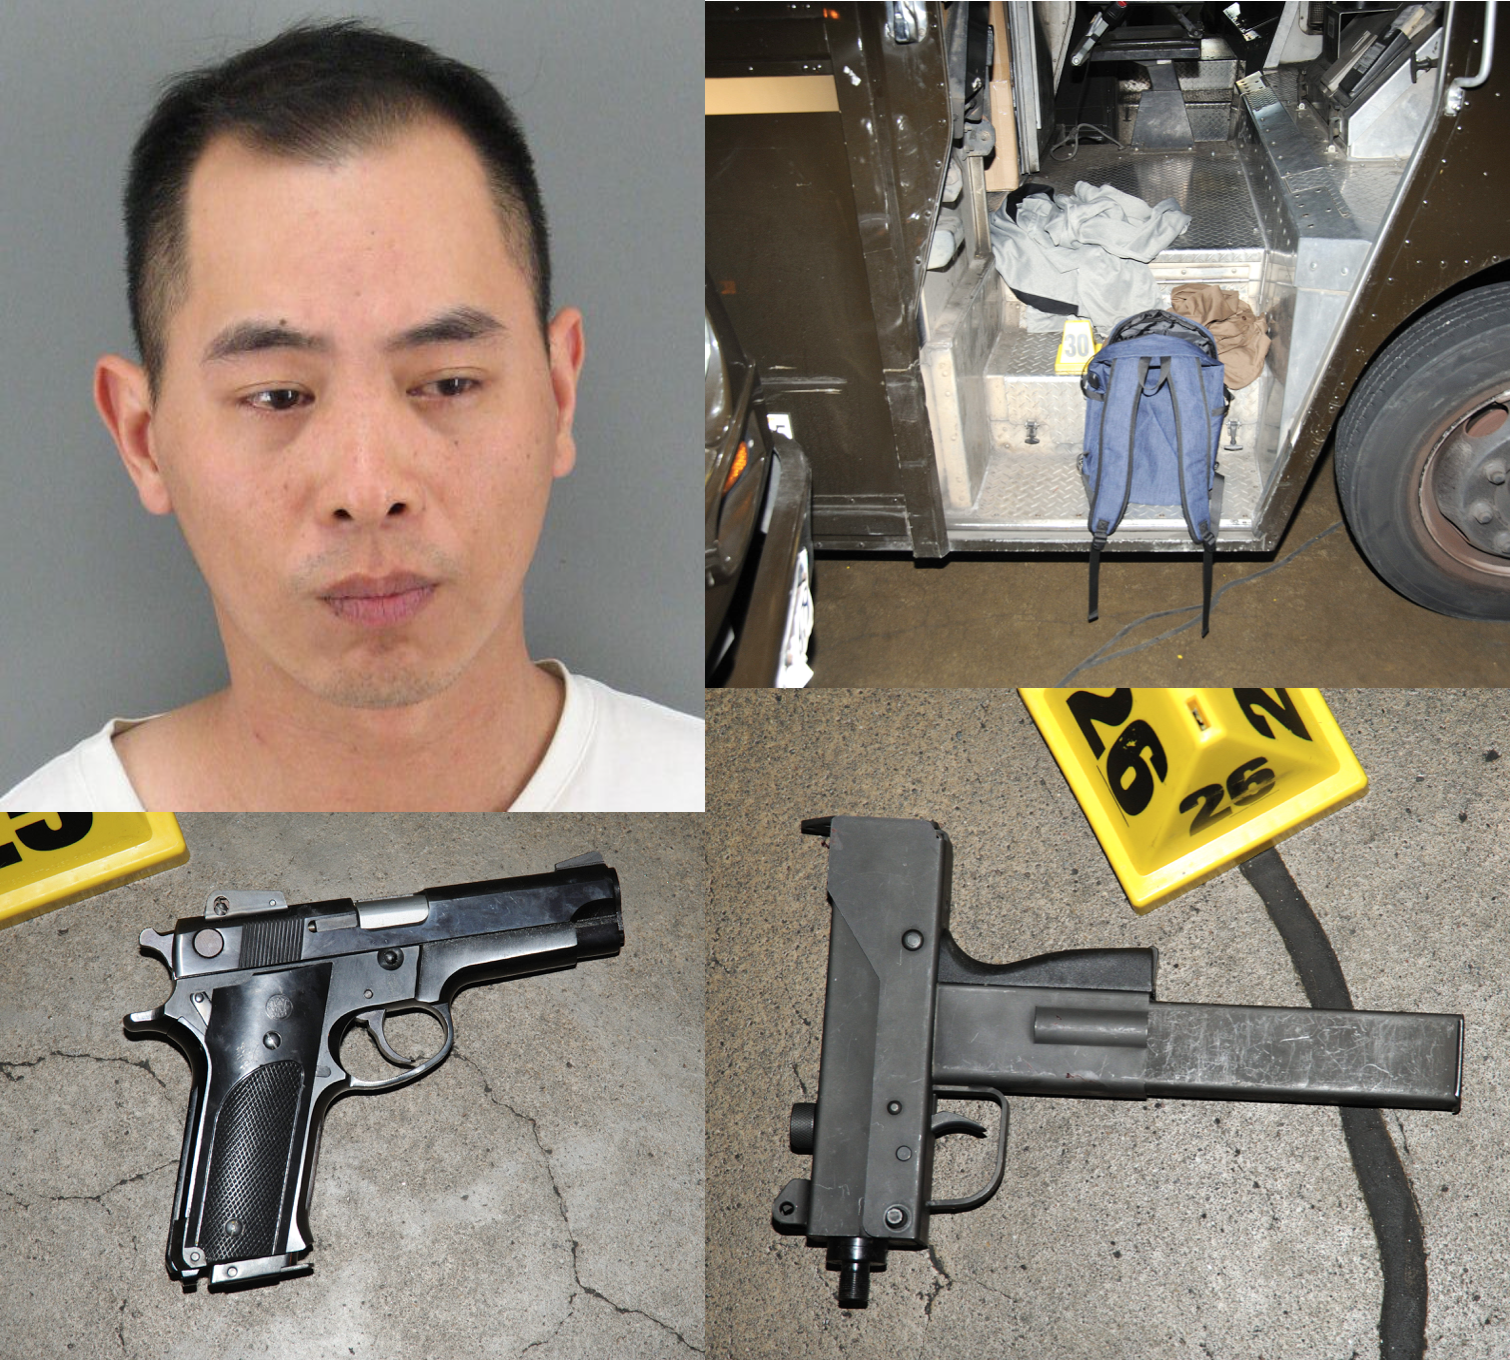 Top Left: Booking photo, Top right: backpack evidence in UPS truck, Bottom Left: gun, Bottom right: gun with extended magazine